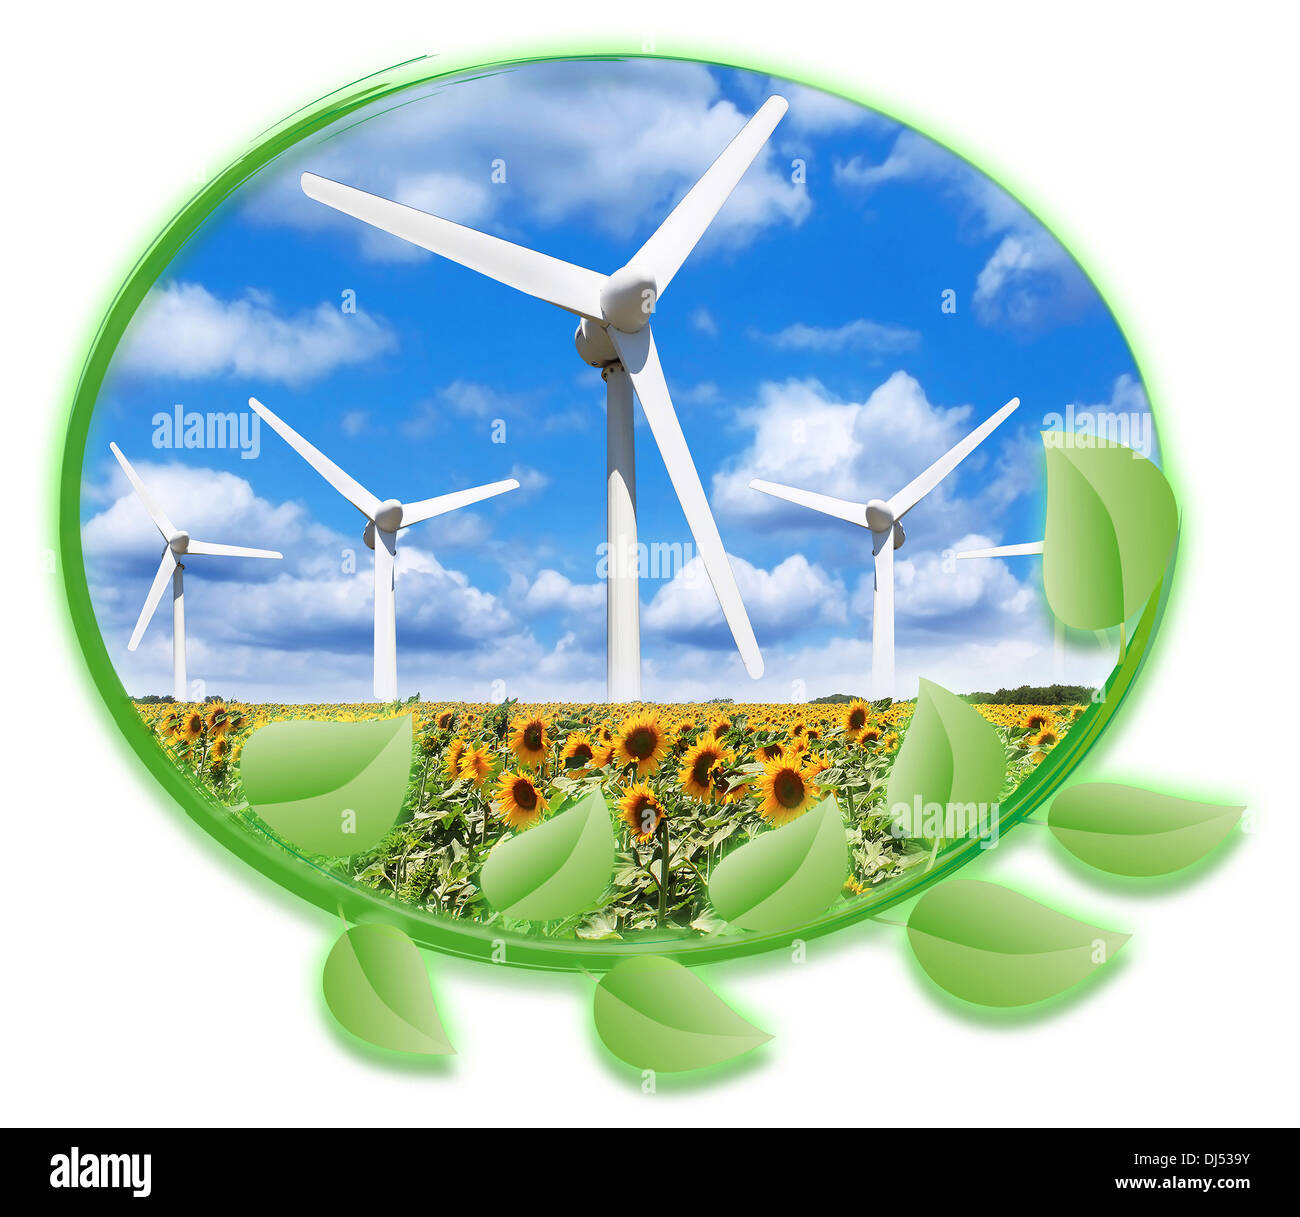 circle of green leaves that surround multiple wind turbines online on cloudy sky background in a field of sunflowers Stock Photo